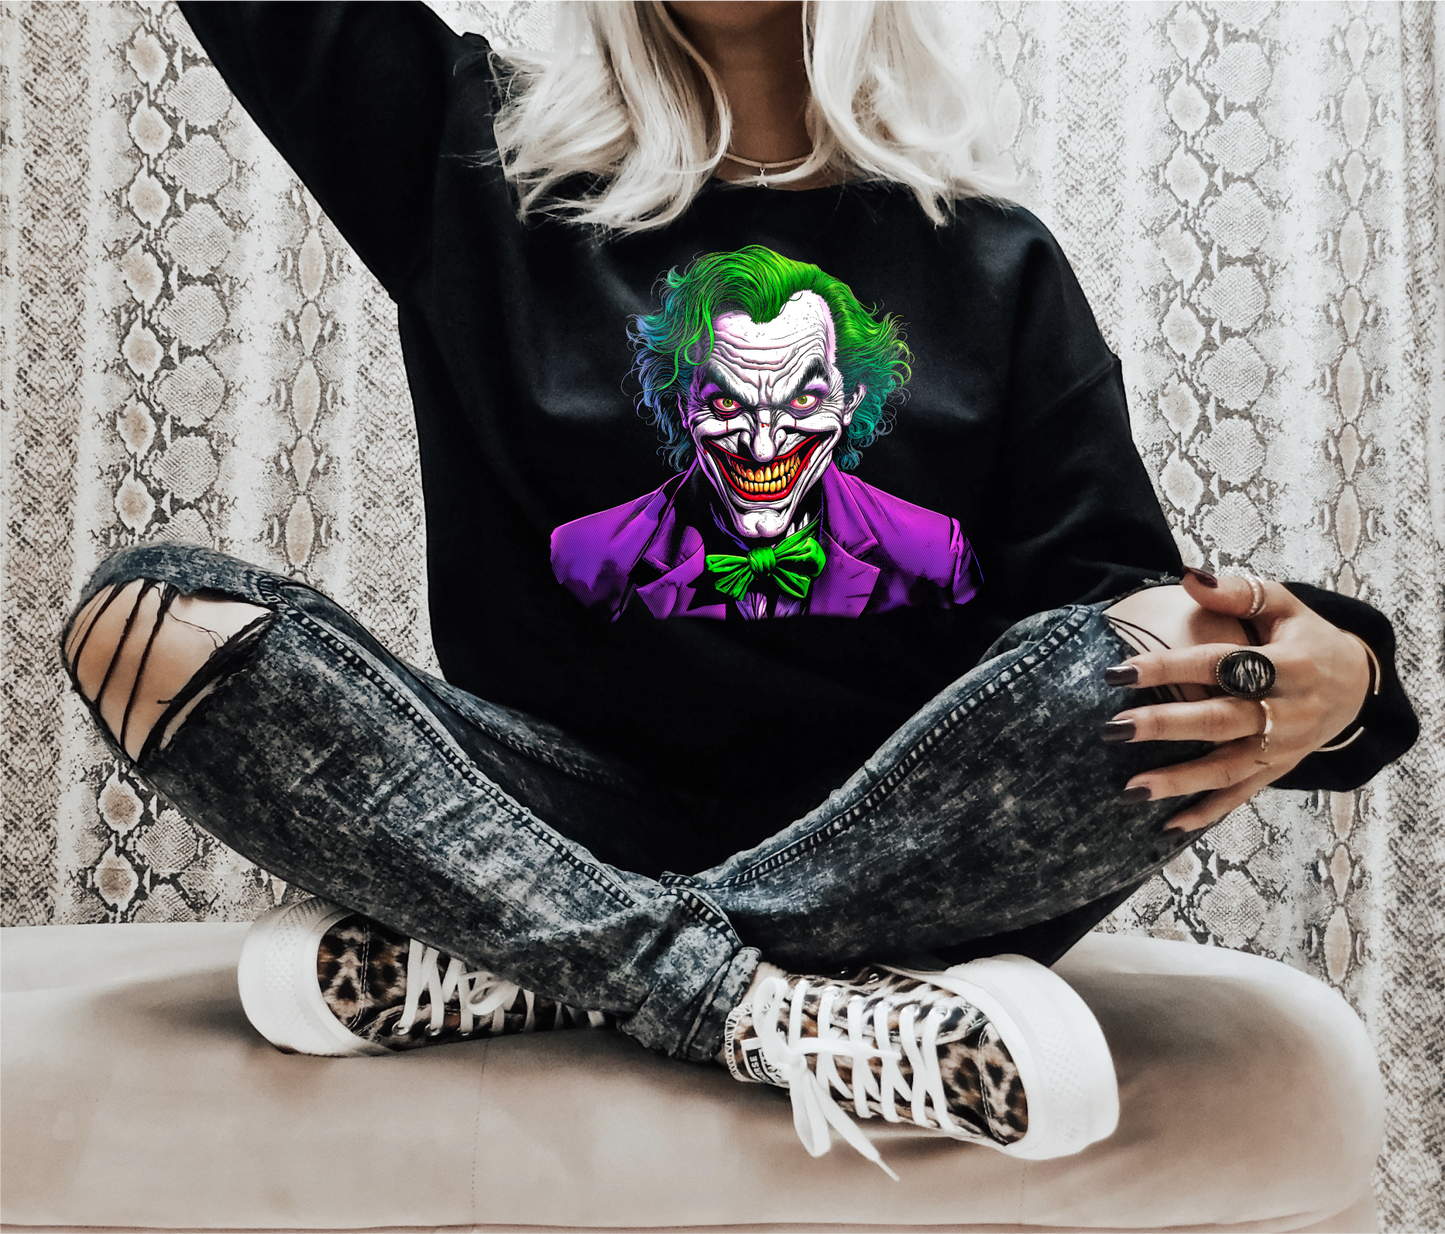 JOKER haha purple suit green hair BLACKED OUT DESIGN ONLY FOR DARK COLORS  ADULT  DTF TRANSFERPRINT TO ORDER